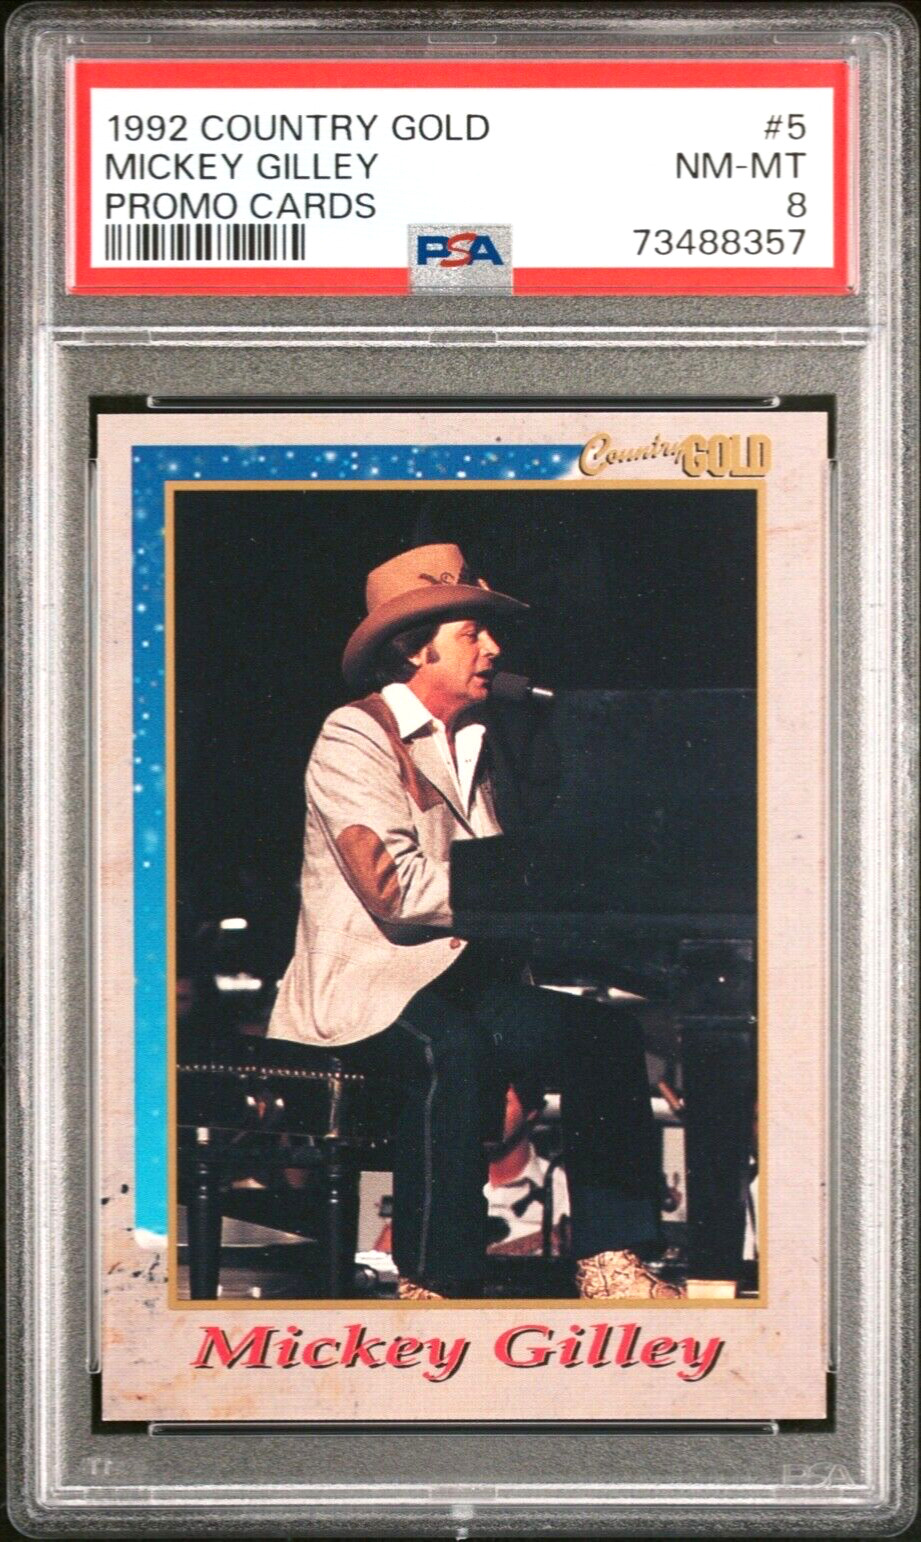 1992 MICKEY GILLEY Sterling Country Gold Promo #5 PSA 8 Pop 1 highest